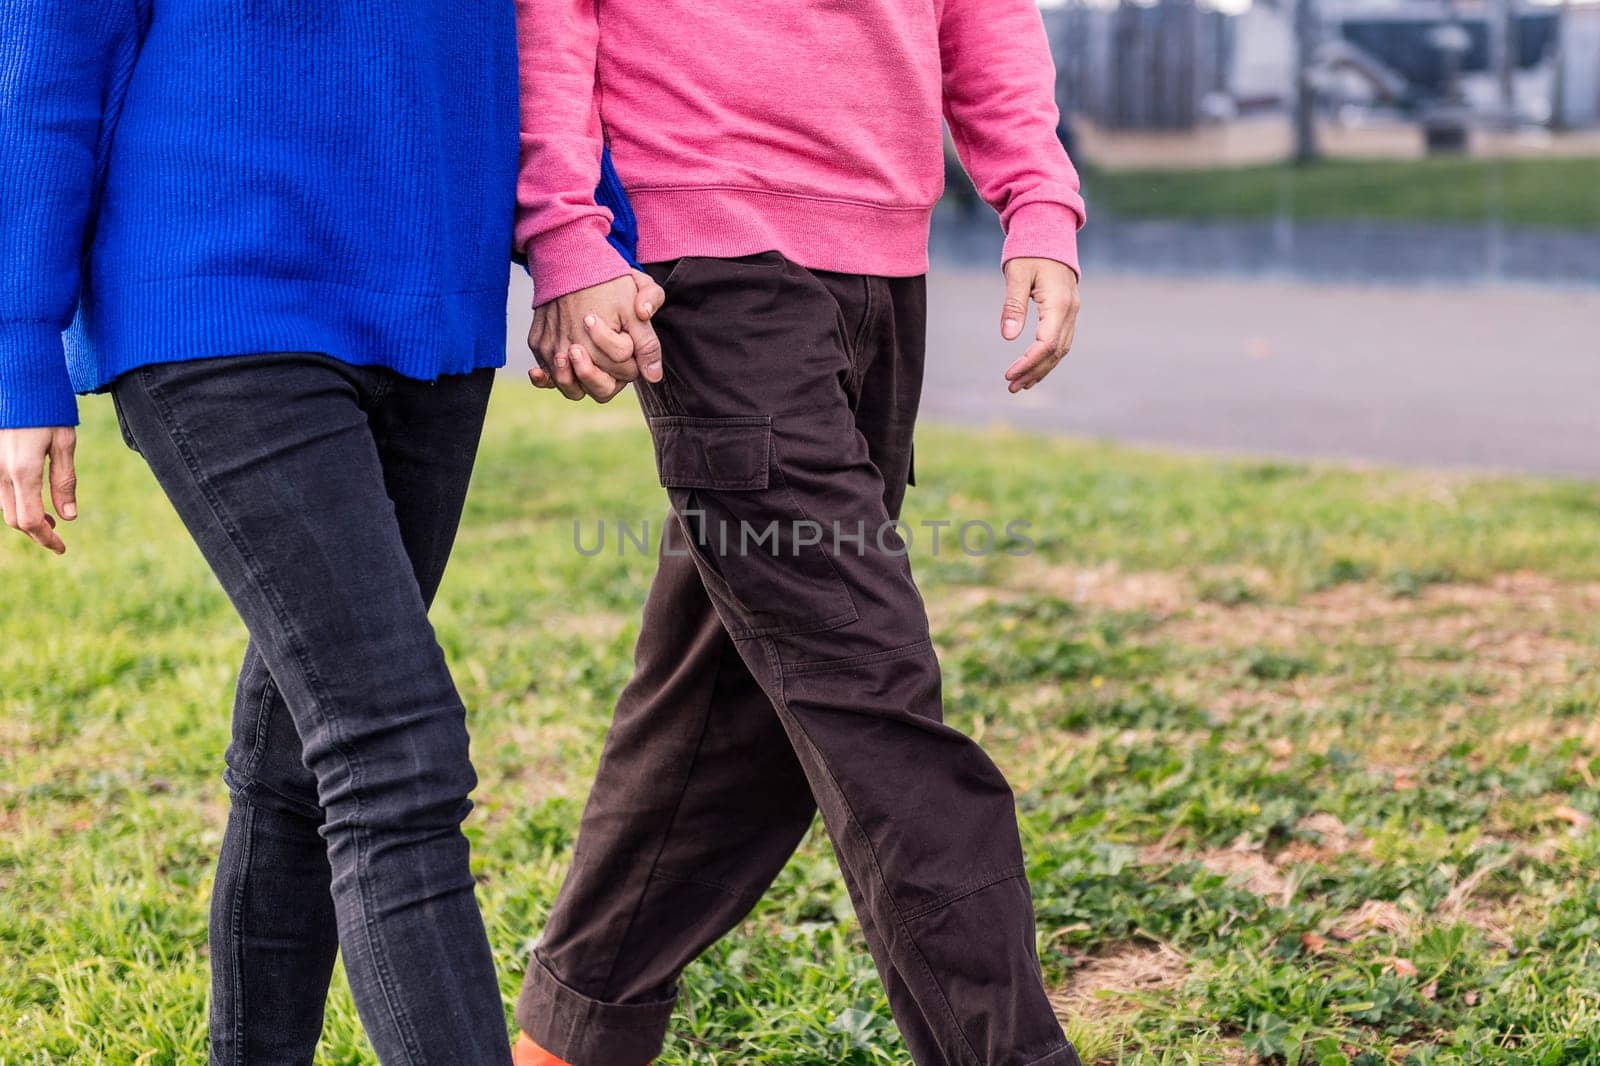 two unrecognizable people walking together holding hands in a park, concept of bonding and love, copy space for text